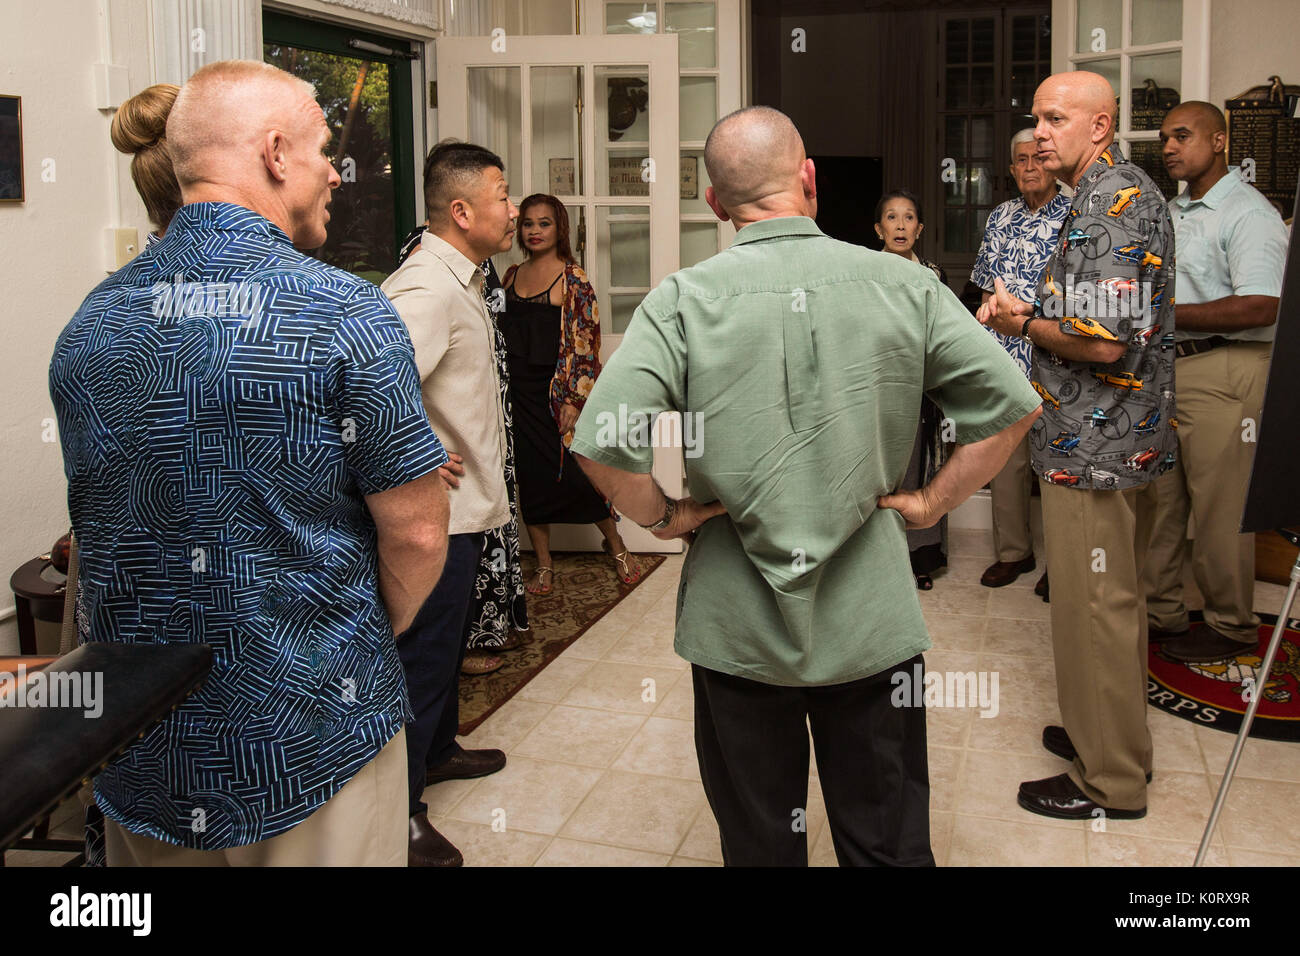 U.S. Marine Corps Lt. Gen. David. H. Berger, commander, U.S. Marine Corps Forces, Pacific, hosts a dinner at the Chesty Puller House on Joint Base Pearl Harbor-Hickam, Hawaii, Aug. 4th, 2017. The dinner was held to welcome the commandant of the Marine Corps to Hawaii. (U.S. Marine Corps photo by Lance Cpl. Makenzie Fallon) Stock Photo